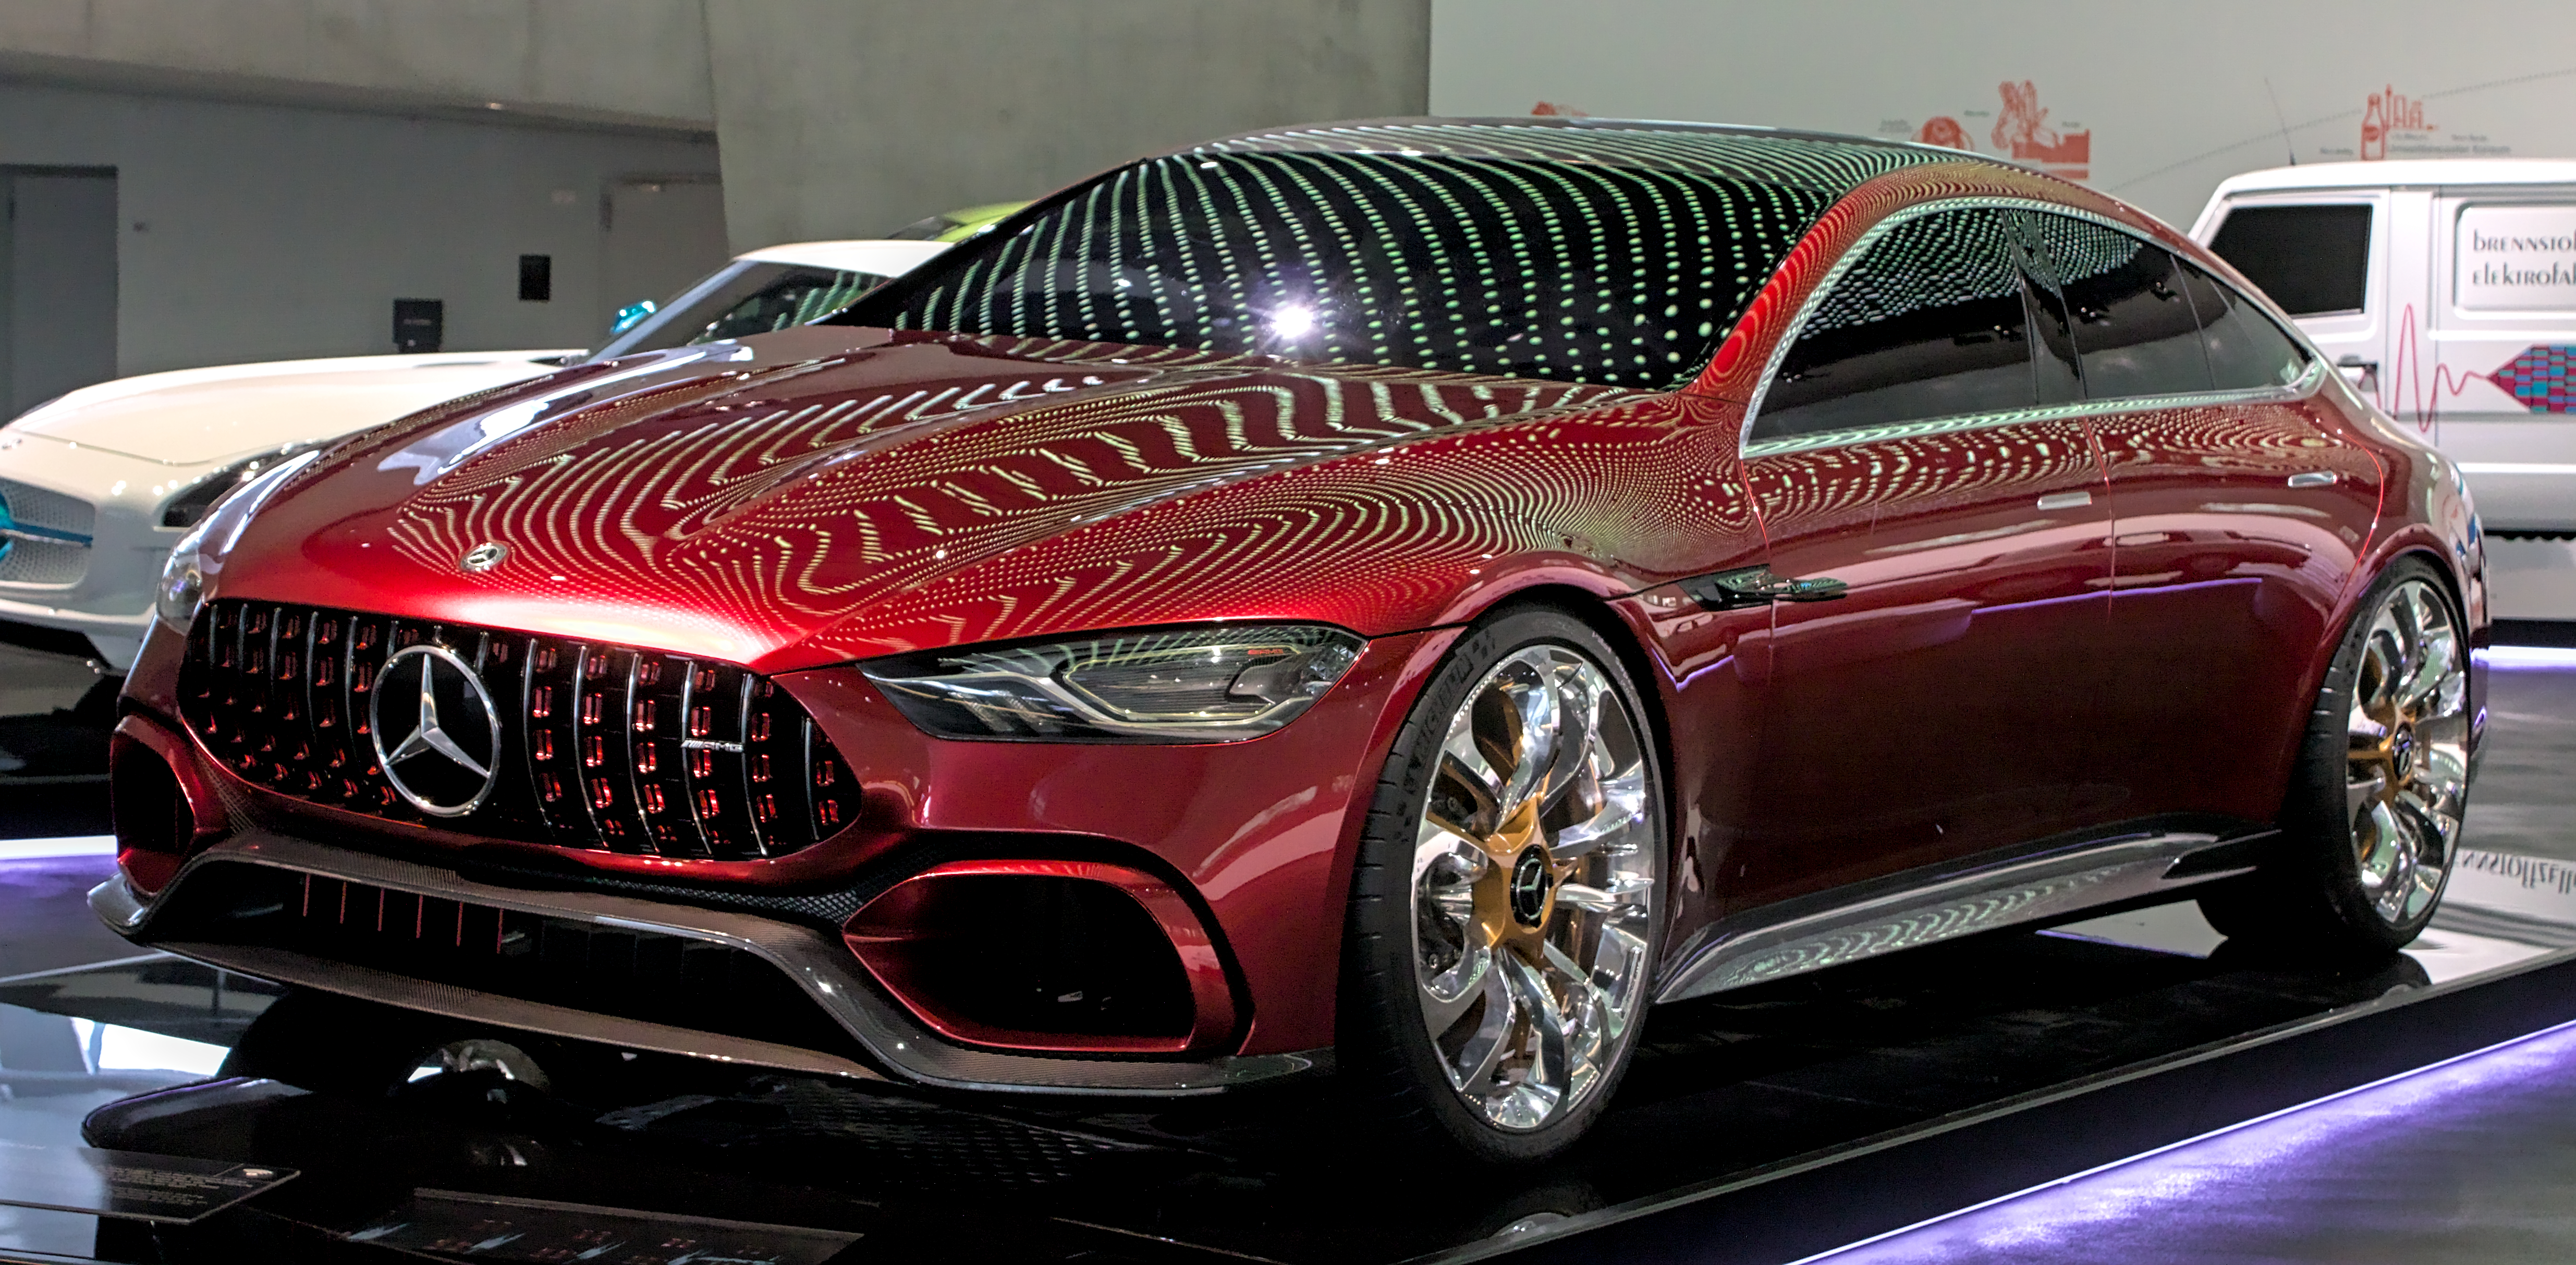 Top 35 luxury car brands in the world